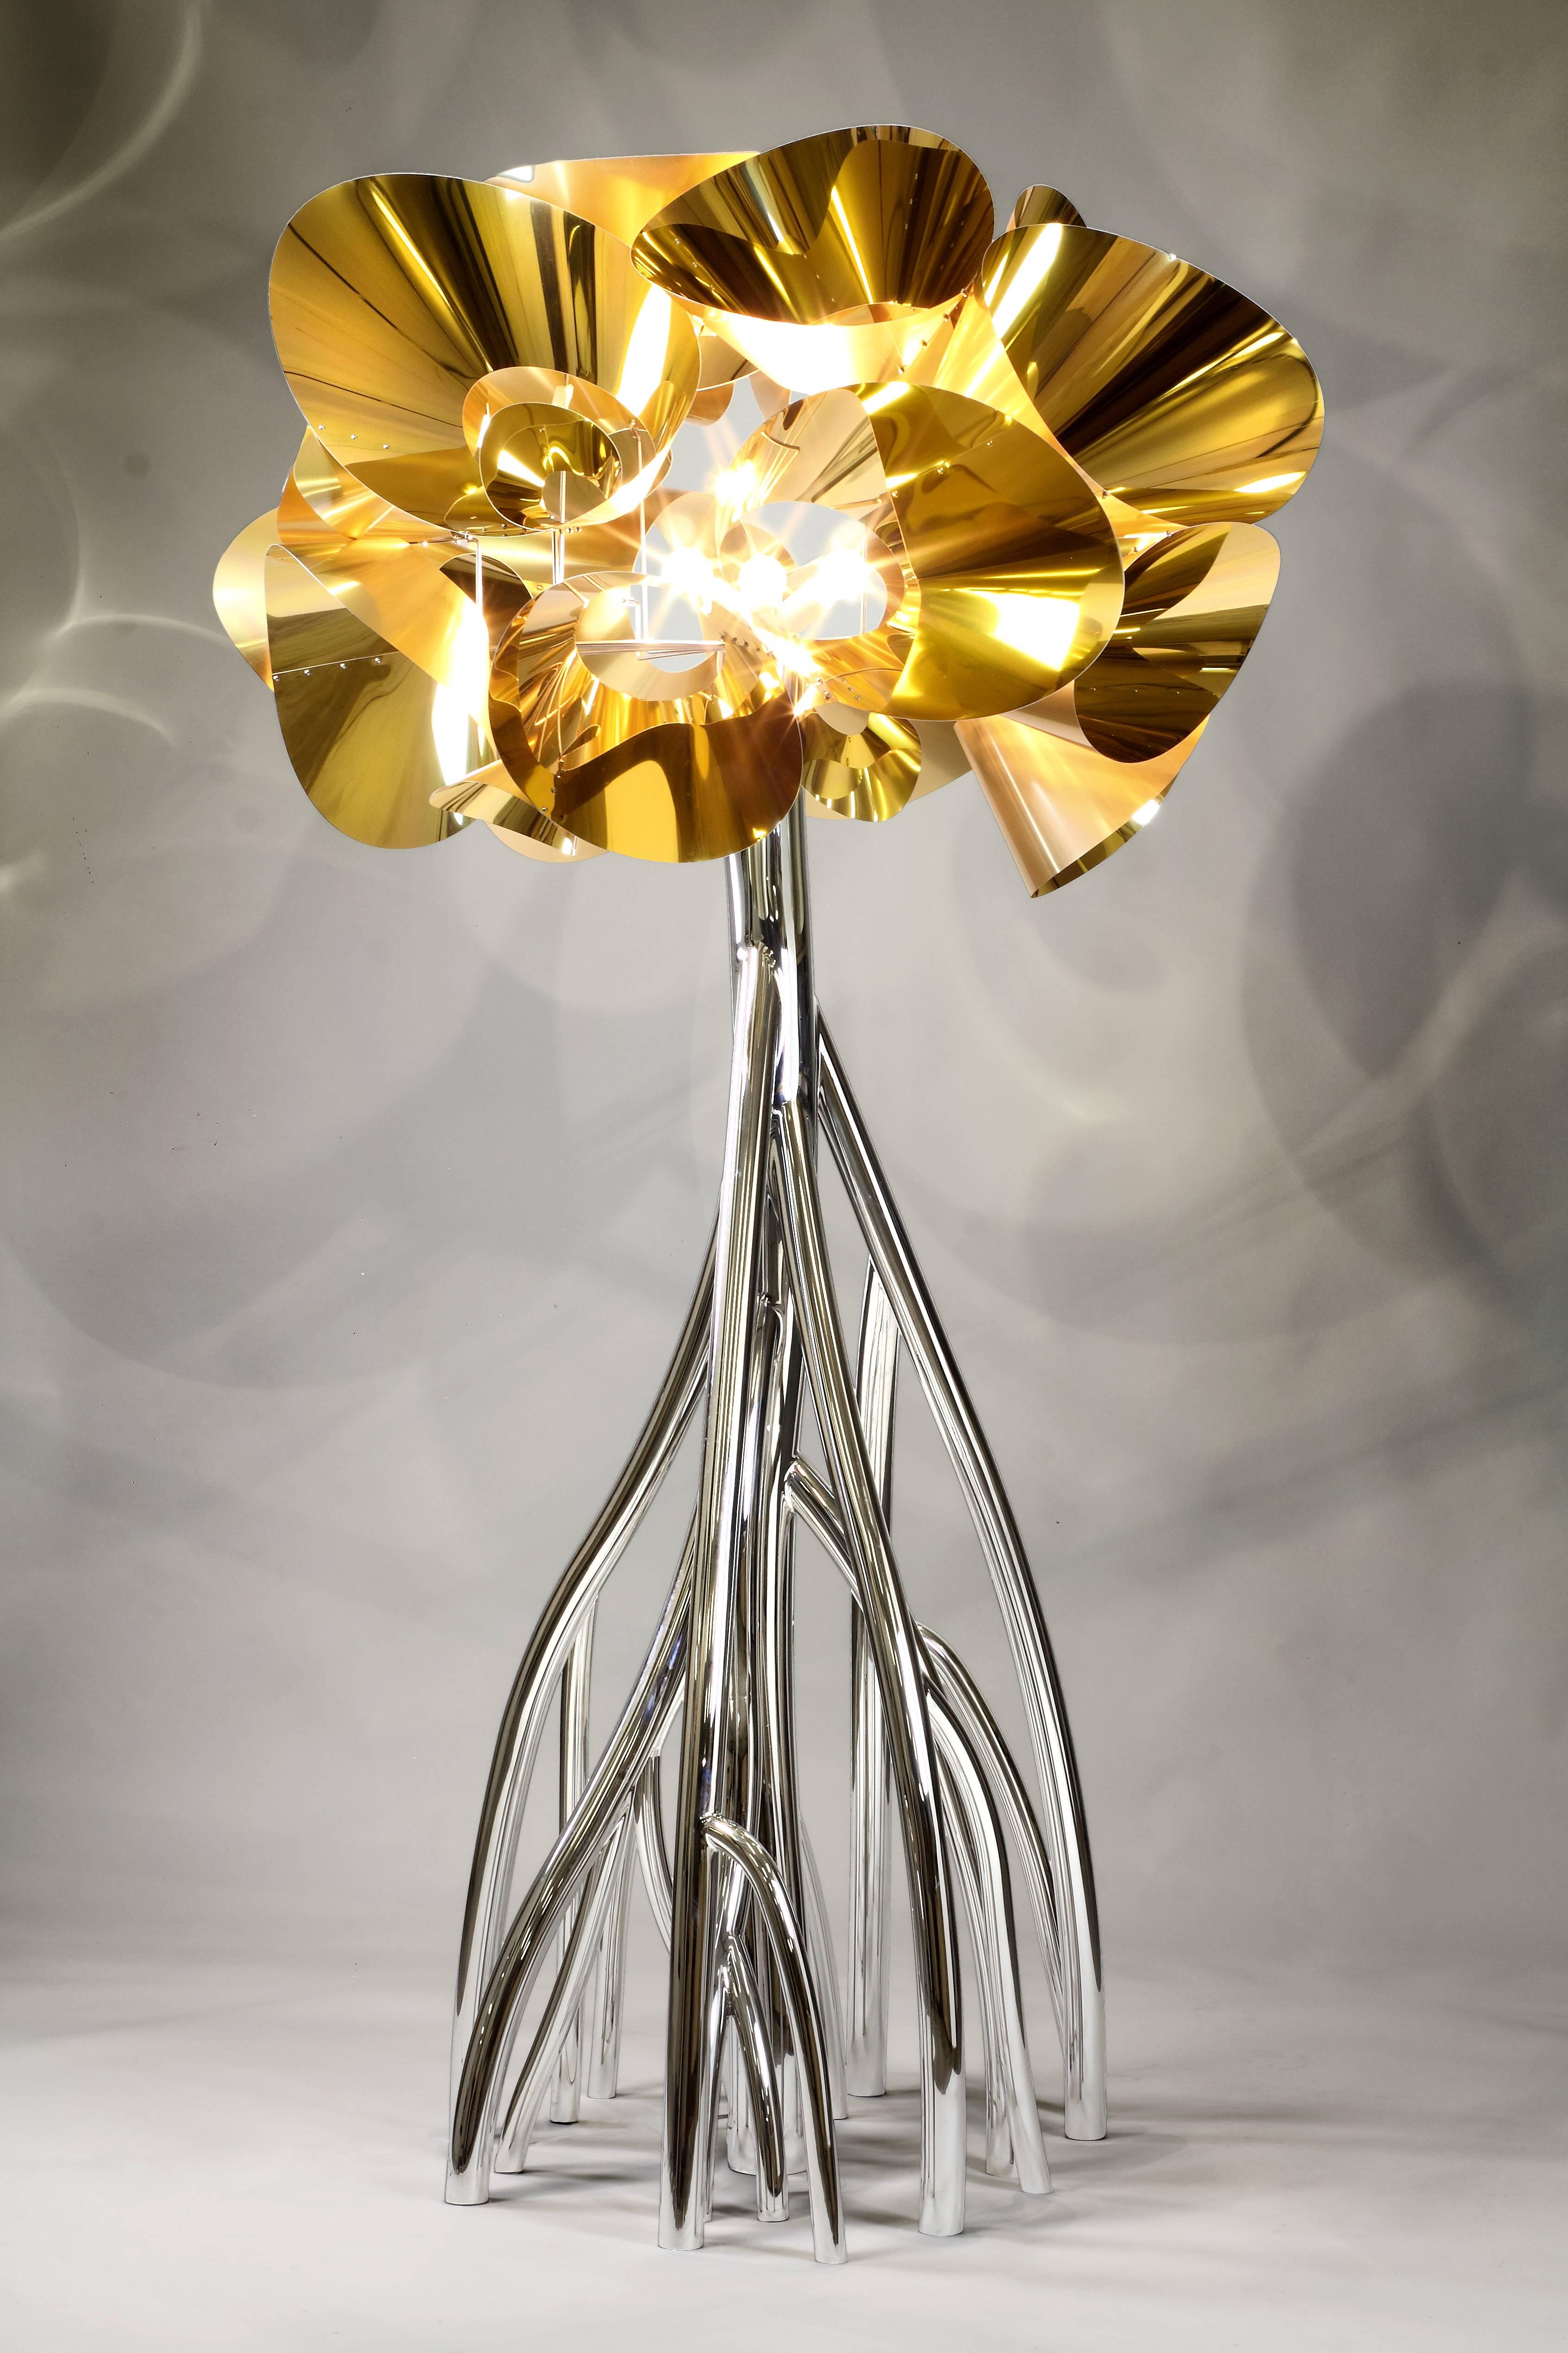 Modern Floor Lamp Decorative Big Sculpture Mirror Steel Gold Lampshade Blossom Italy For Sale